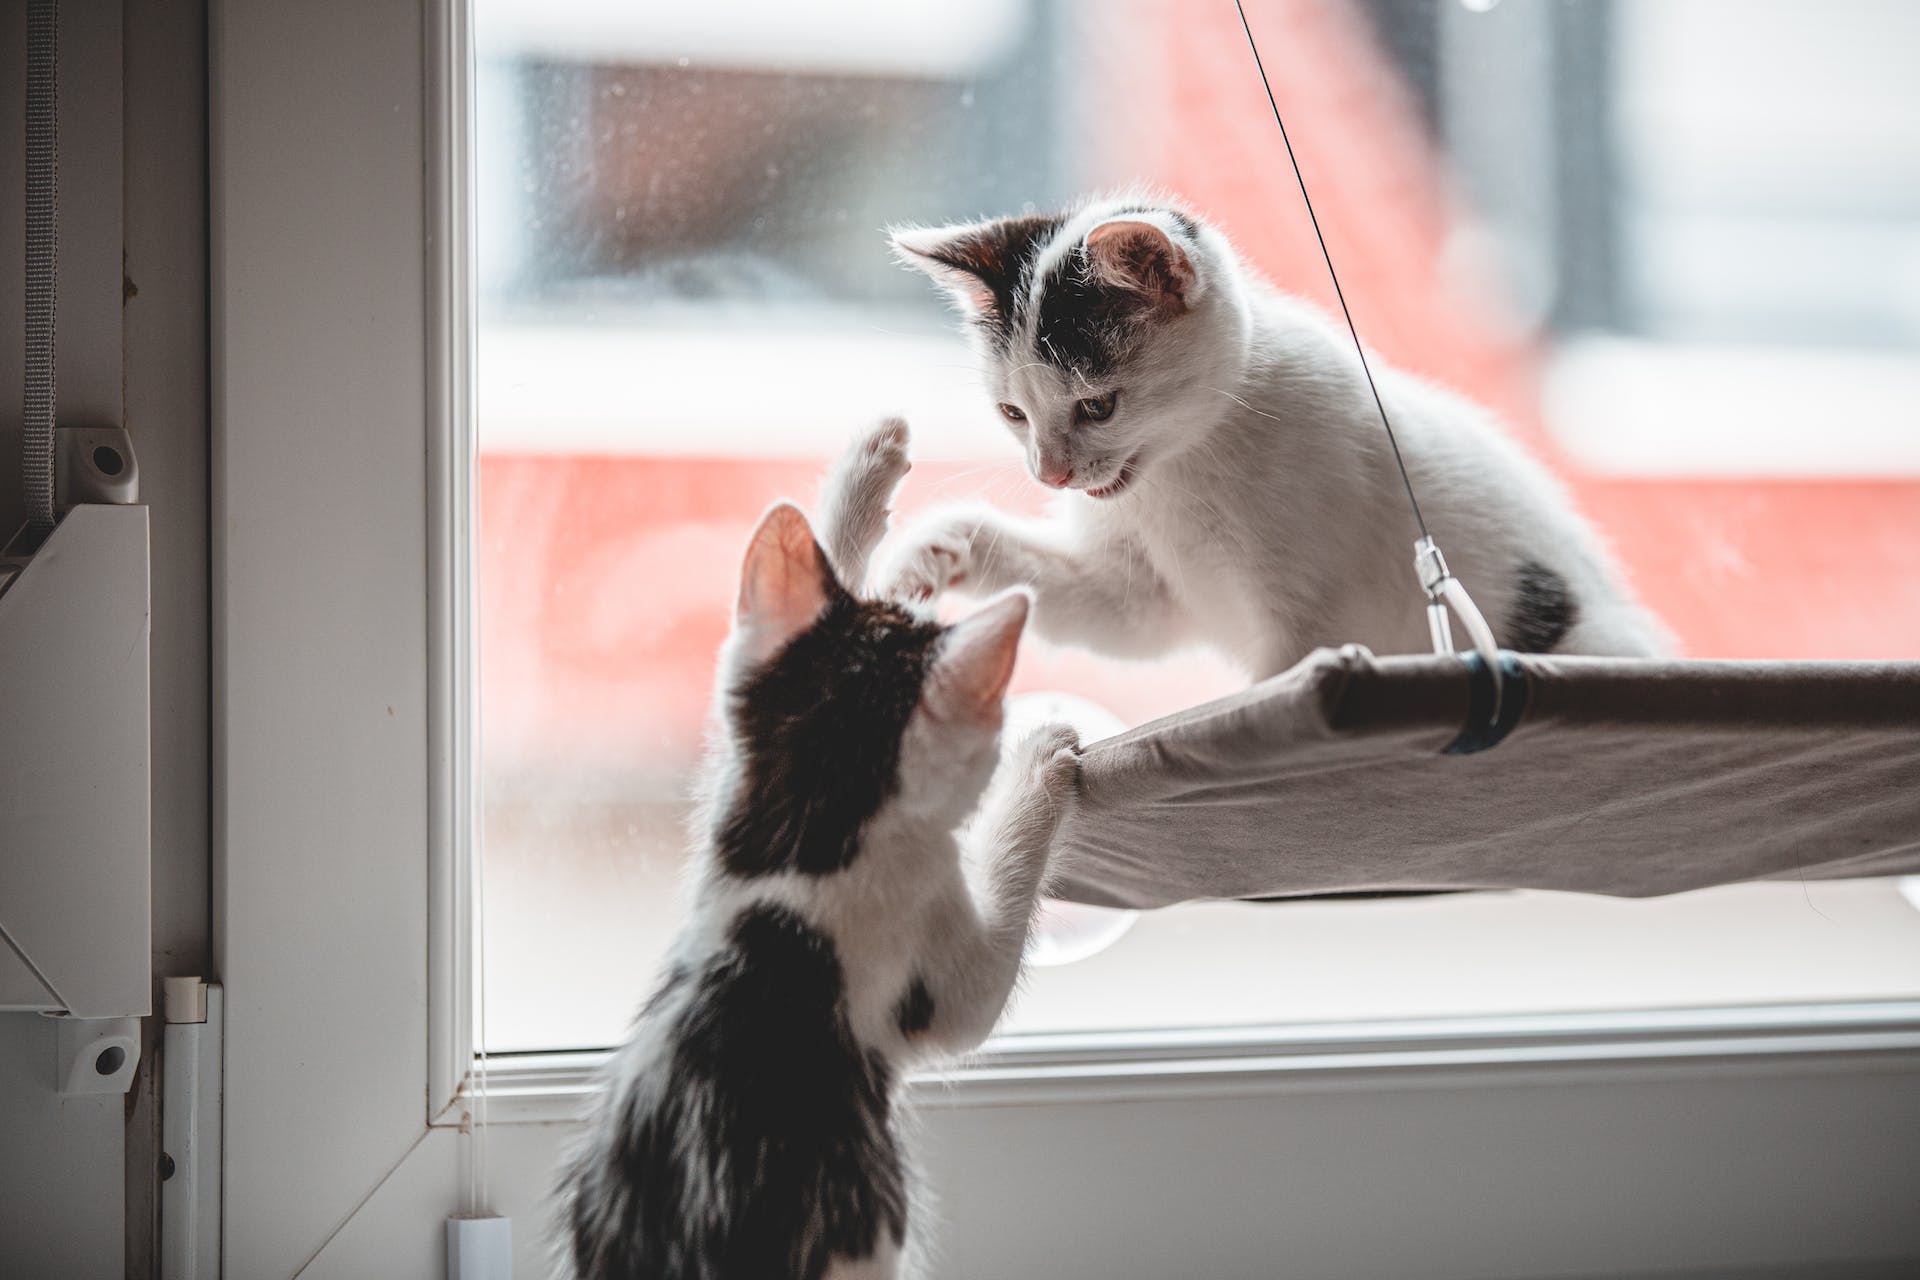 Two cats playing by a window indoors